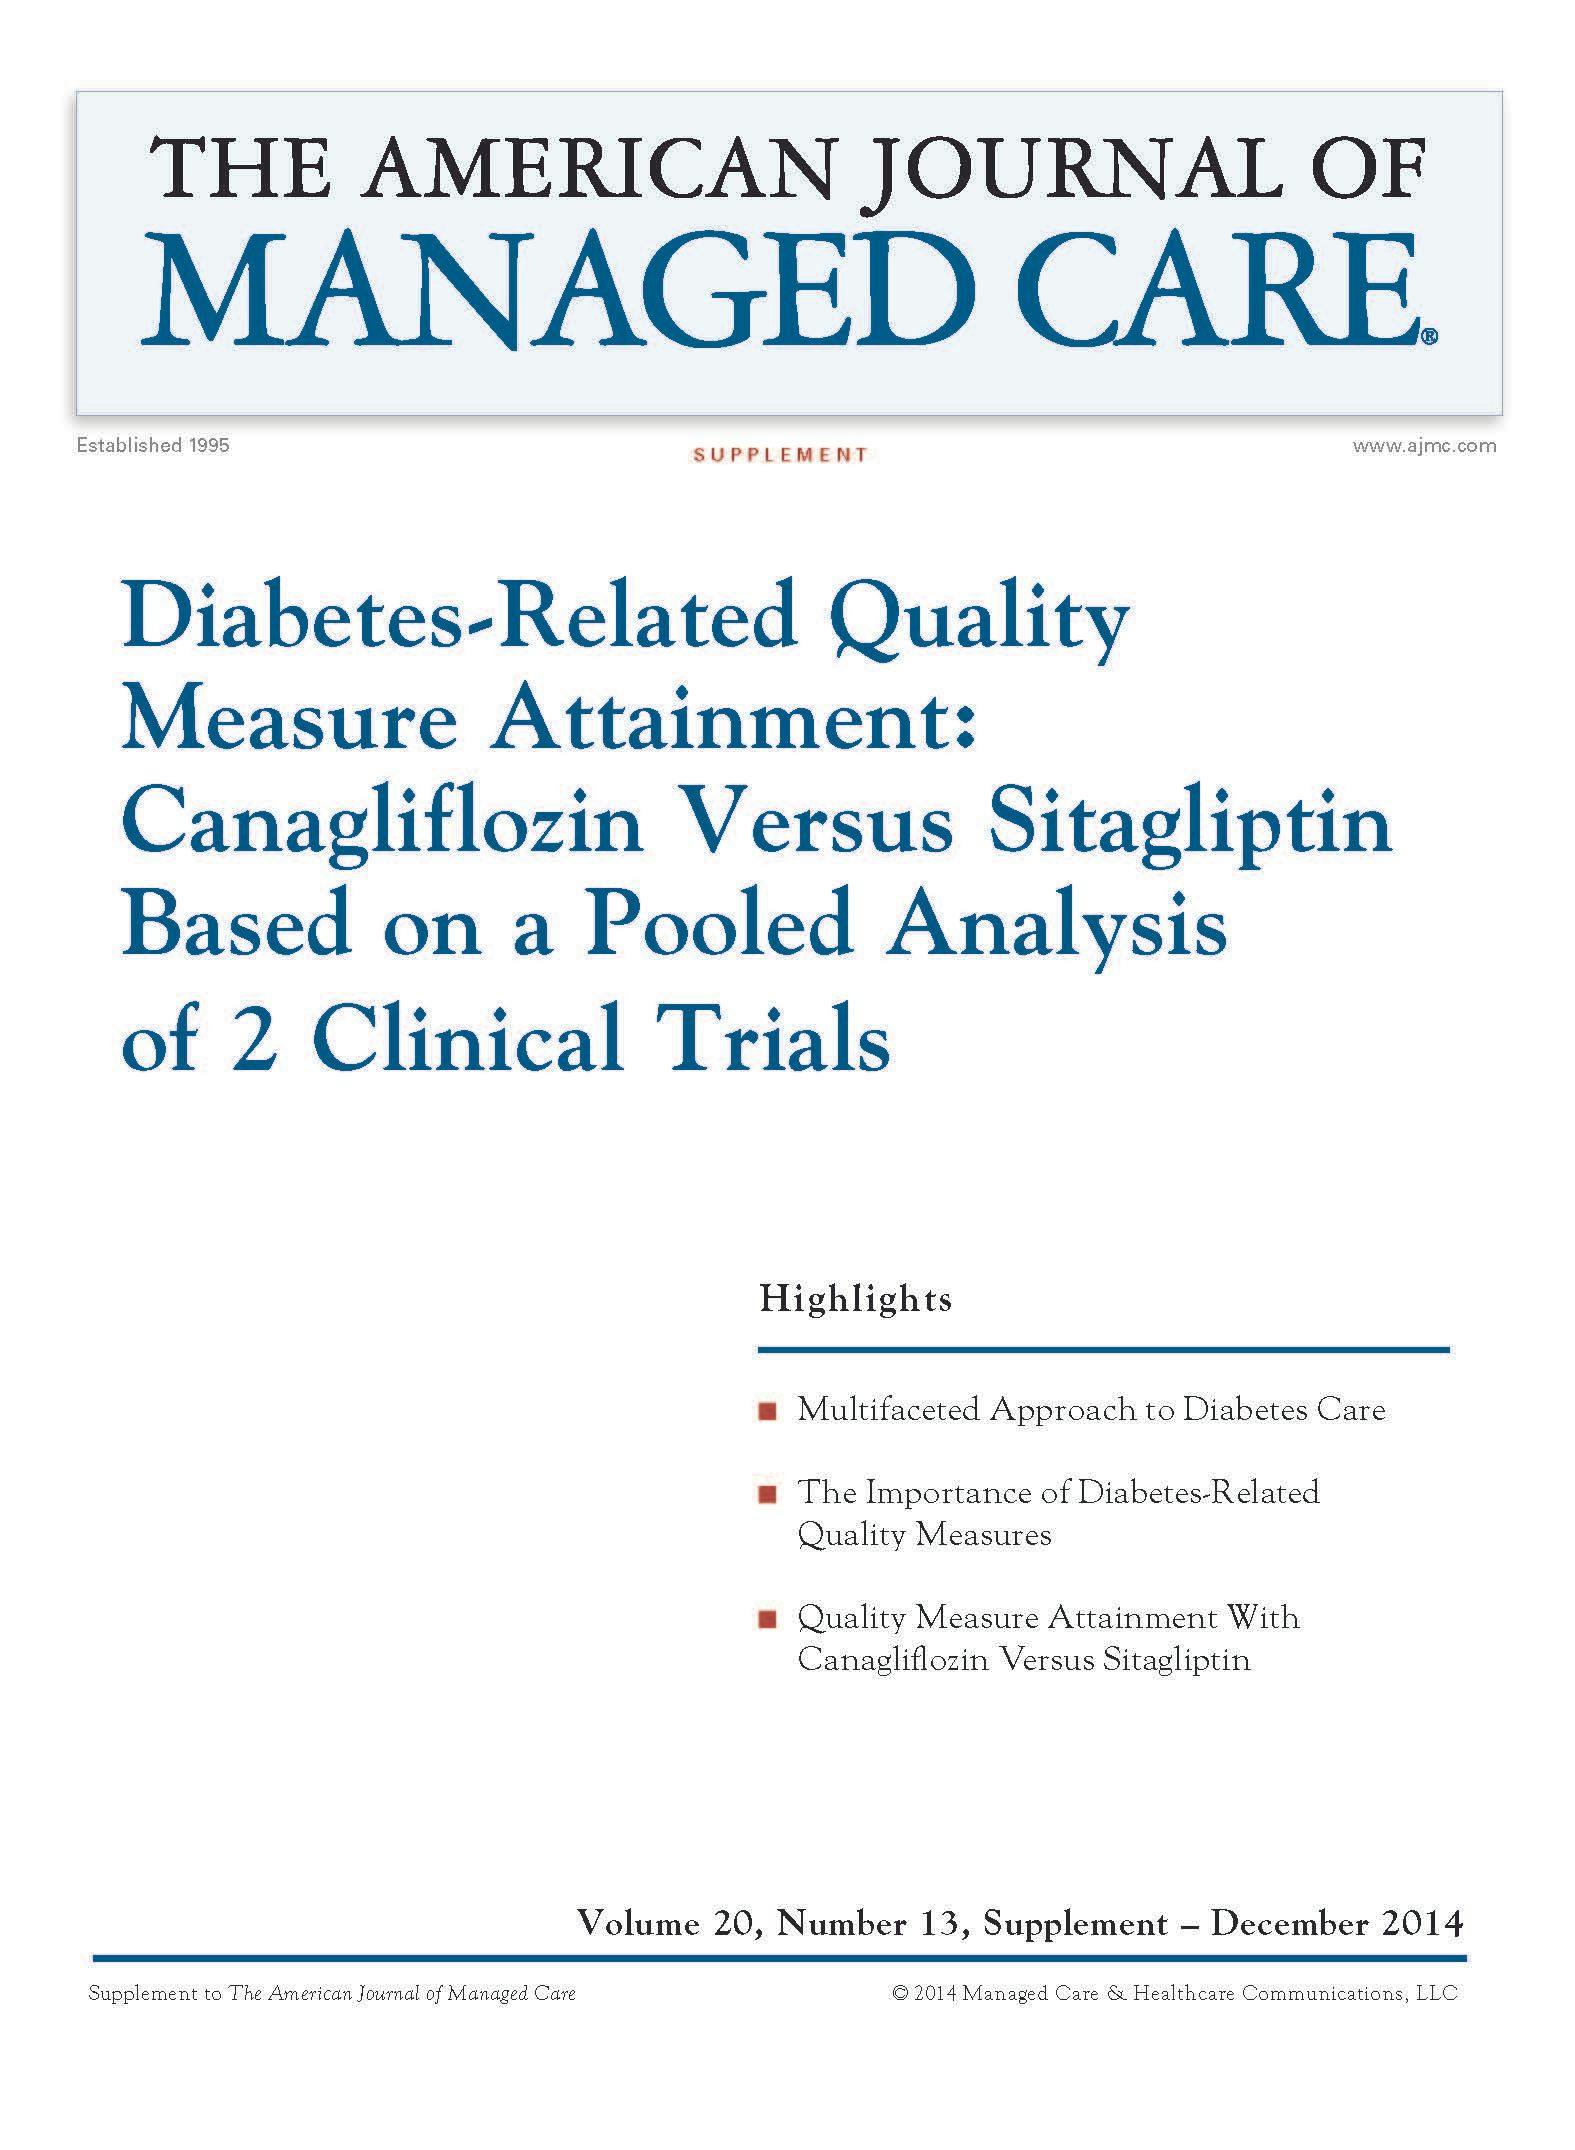 Diabetes-Related Quality Measure Attainment: Canagliflozin Versus Sitagliptin Based on a Pooled Anal